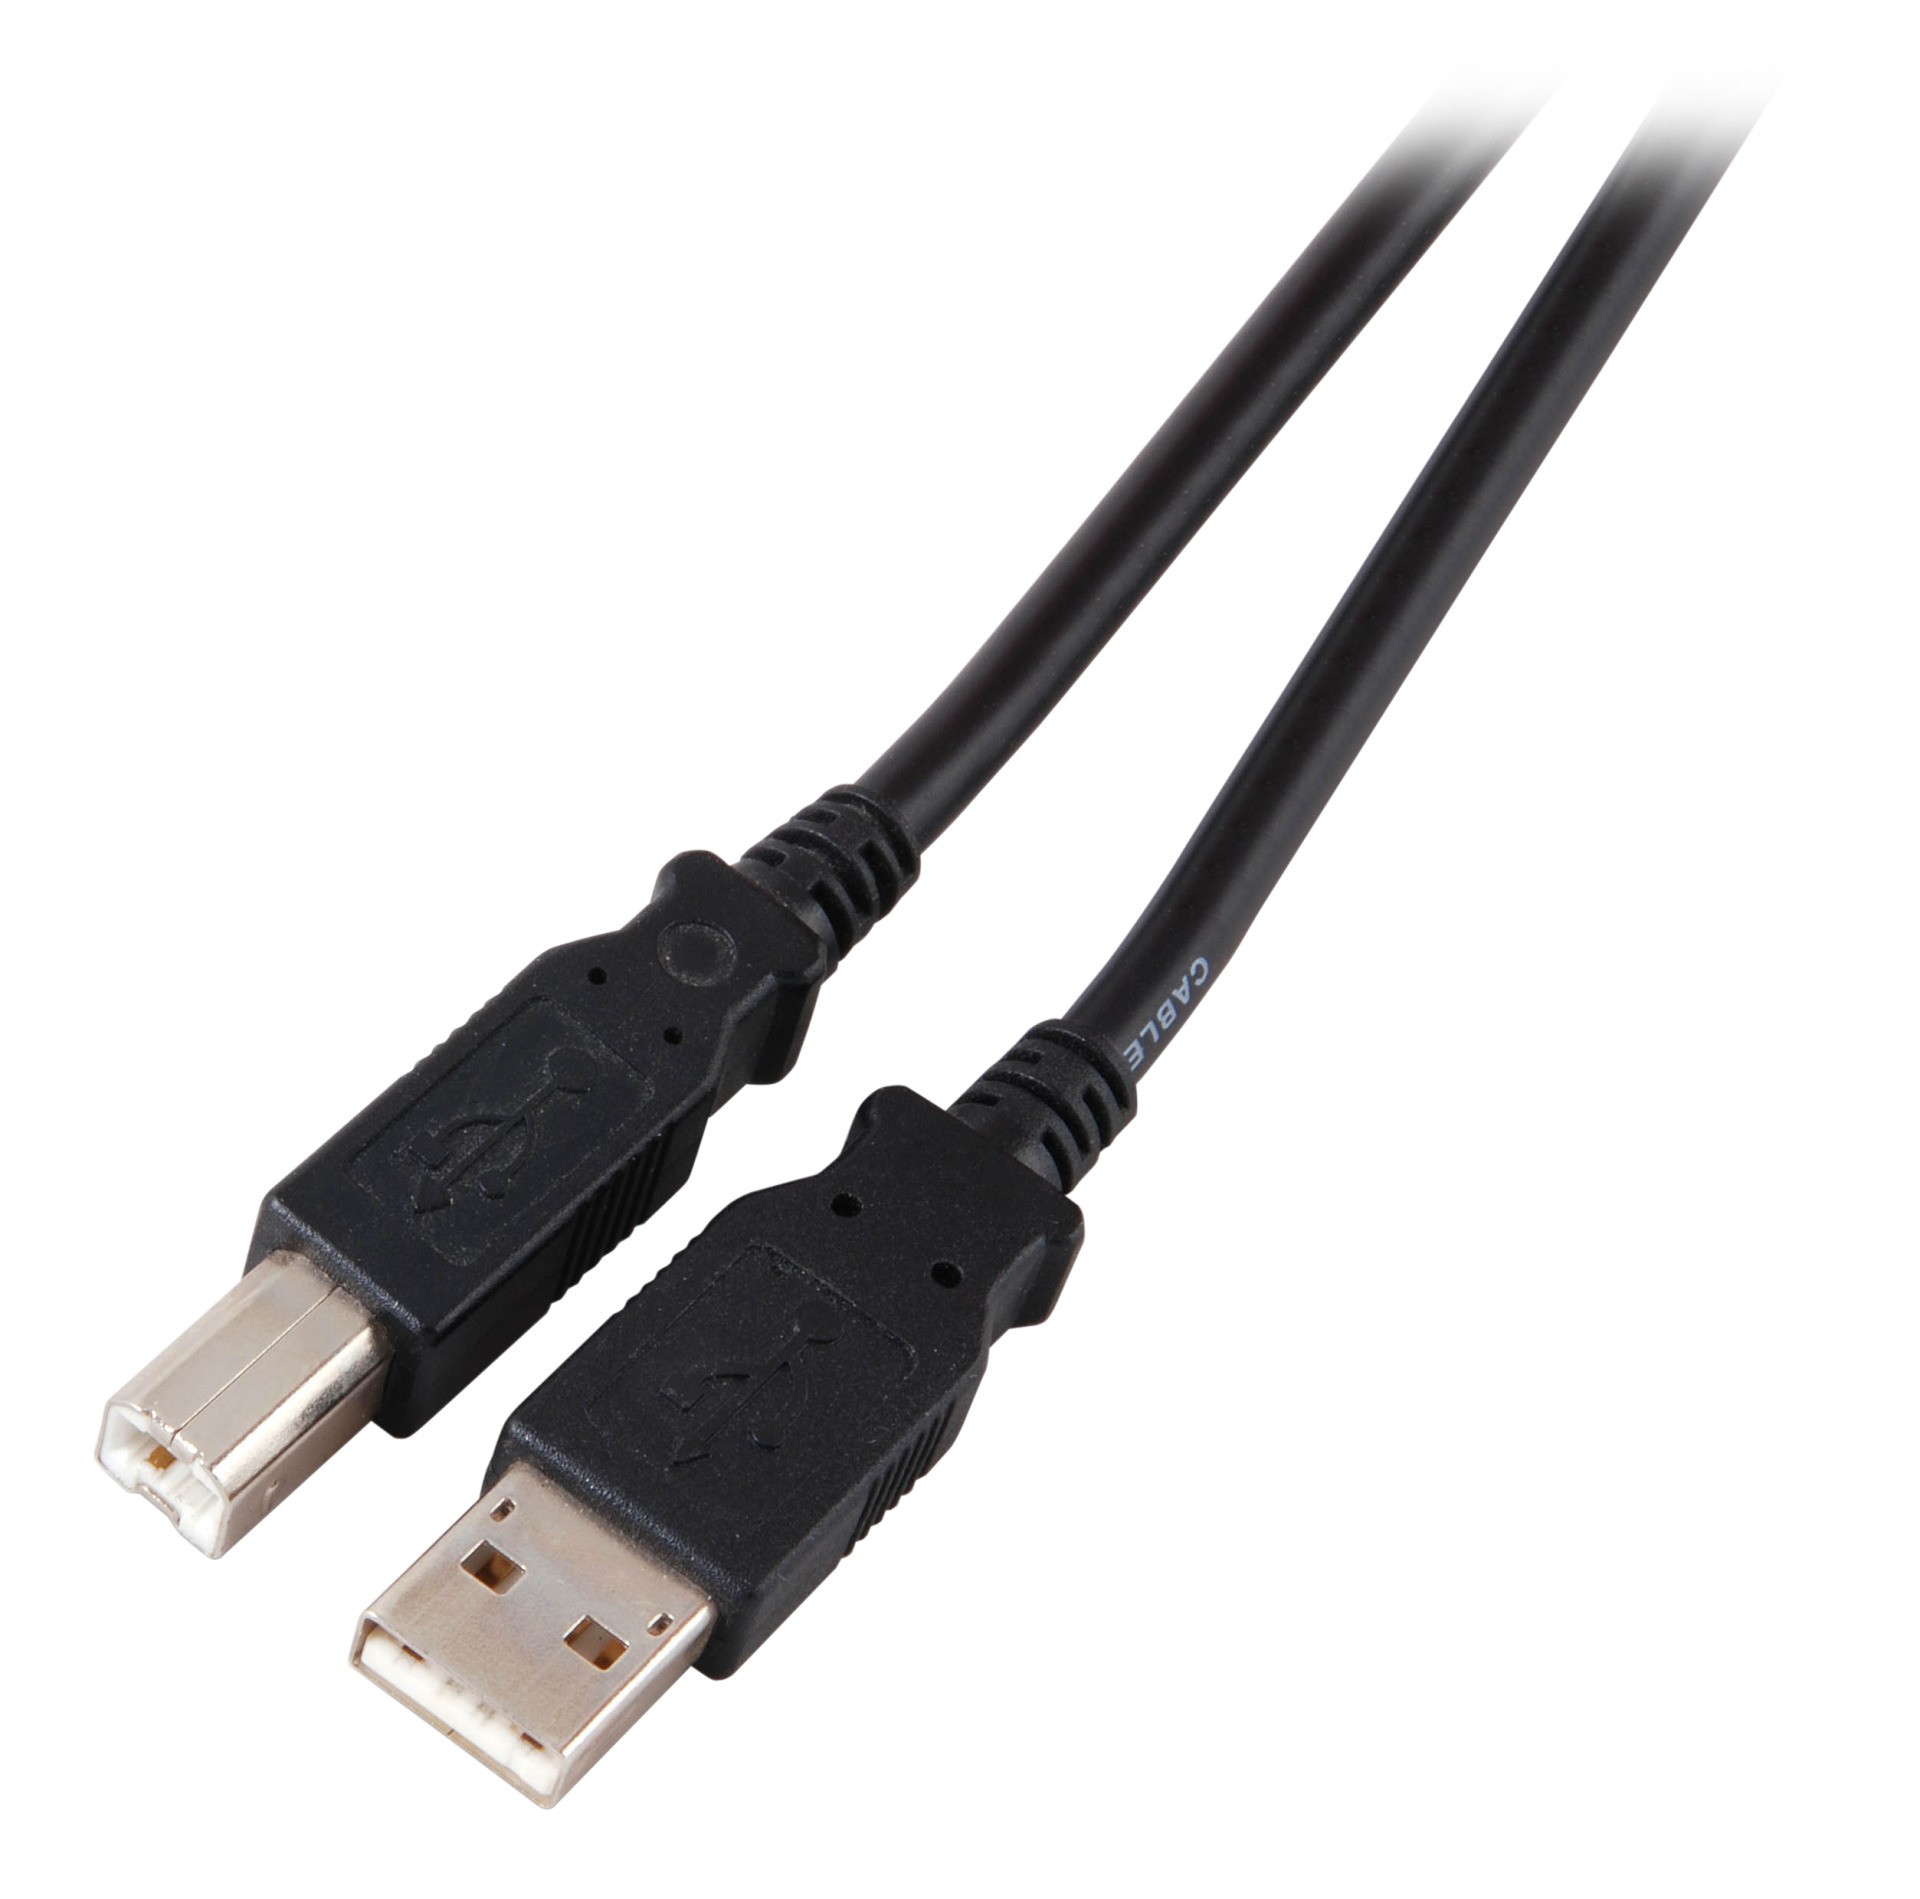 USB2.0 Connection Cable A-B, M-M, 1.8m, grey, Classic